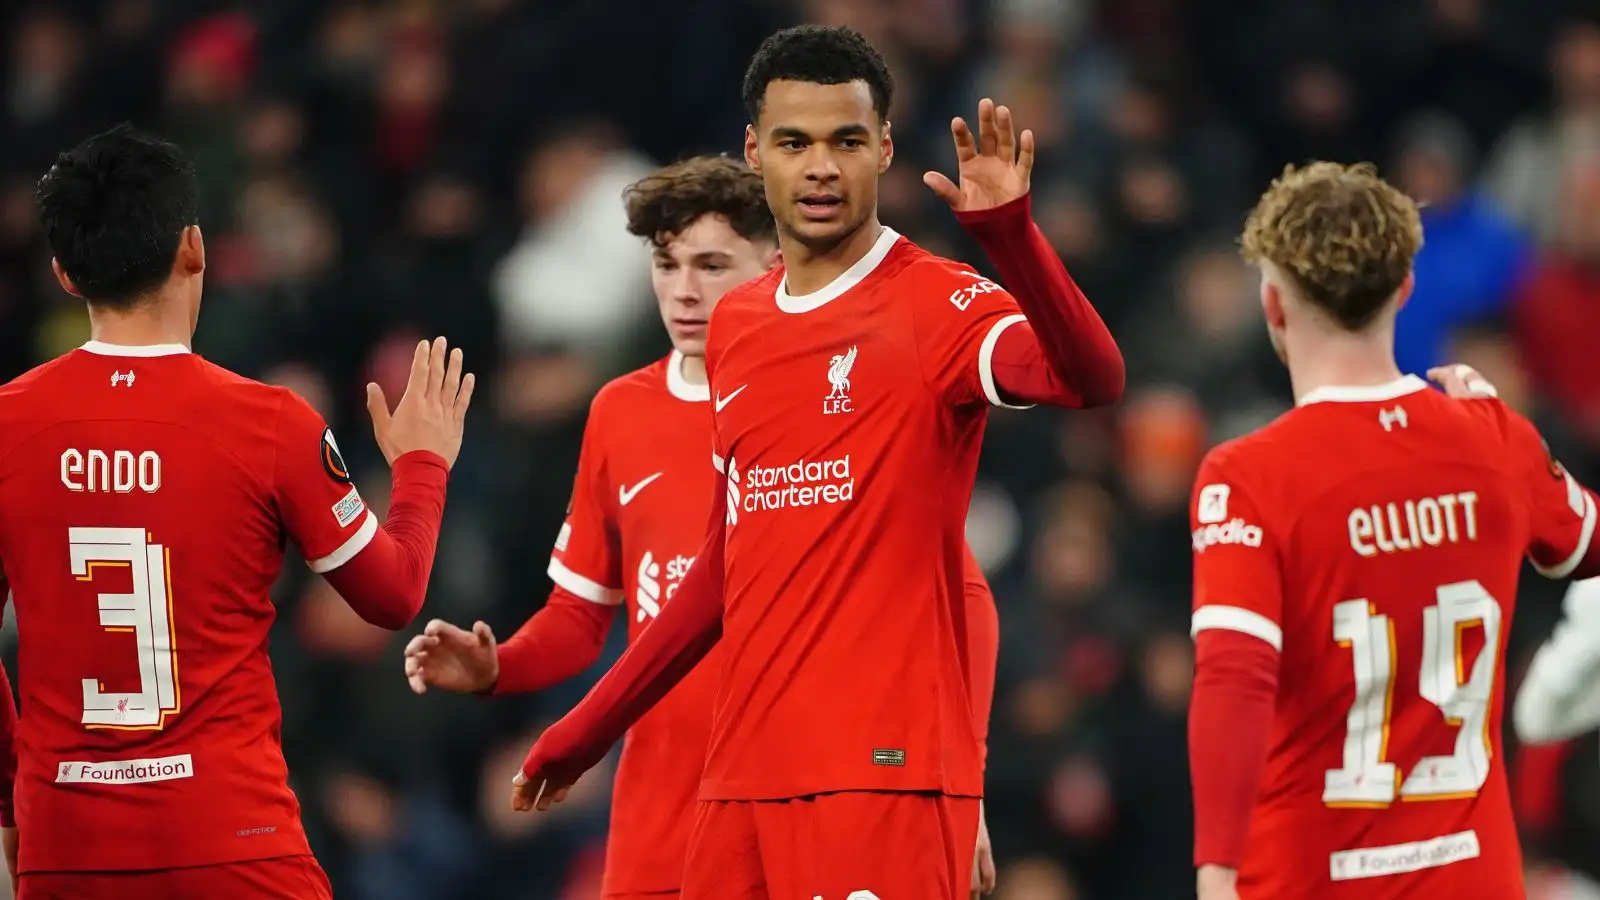 Liverpool enjoy themselves against carefree LASK as best news of the night comes from elsewhere